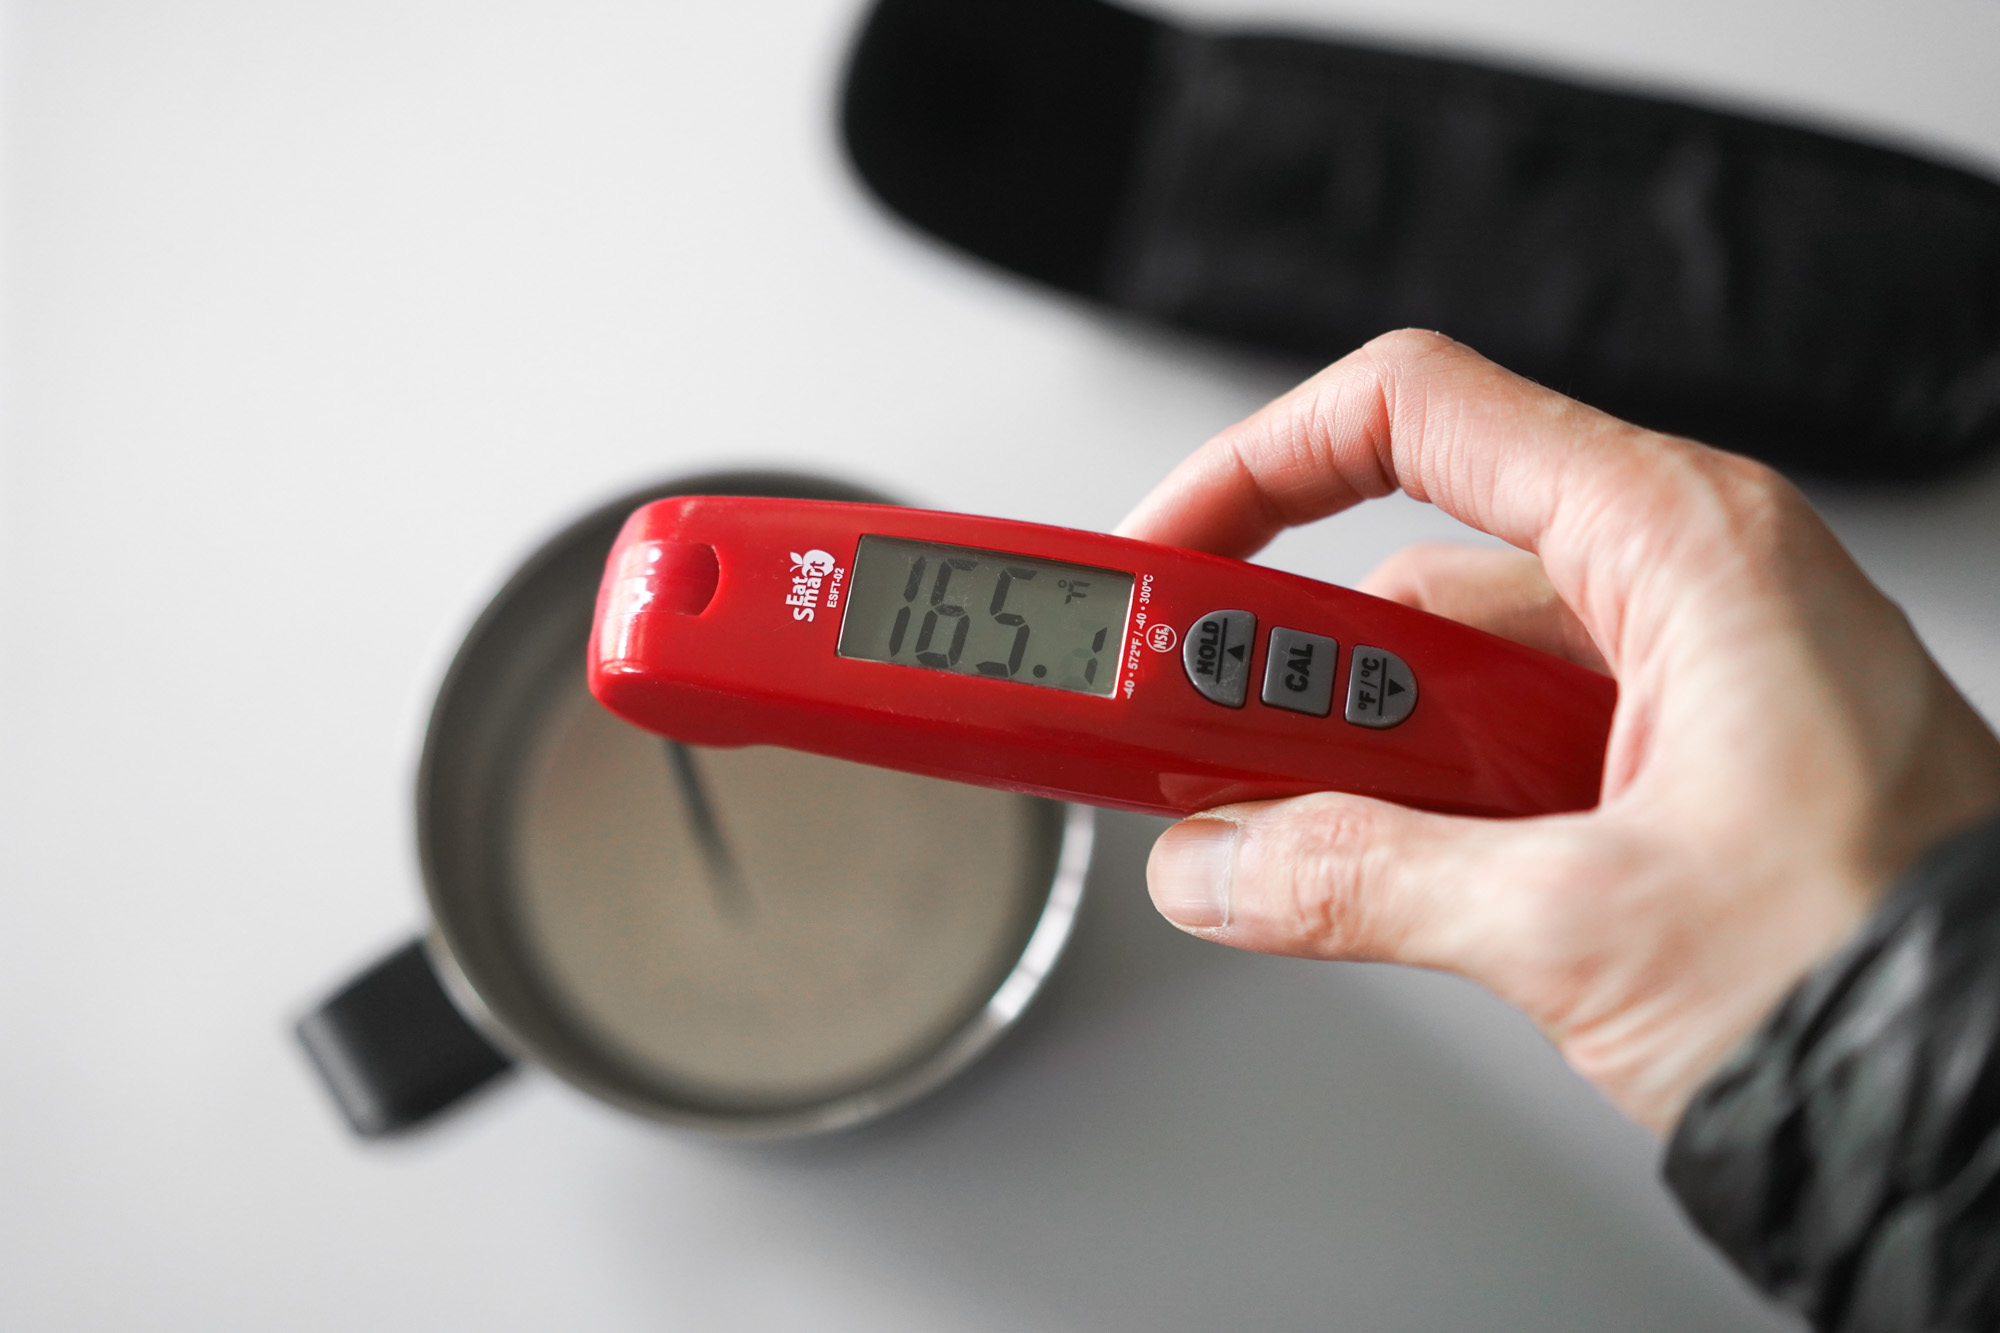 Smartro ST54 Digital Cooking Thermometer Review - King of the Coals